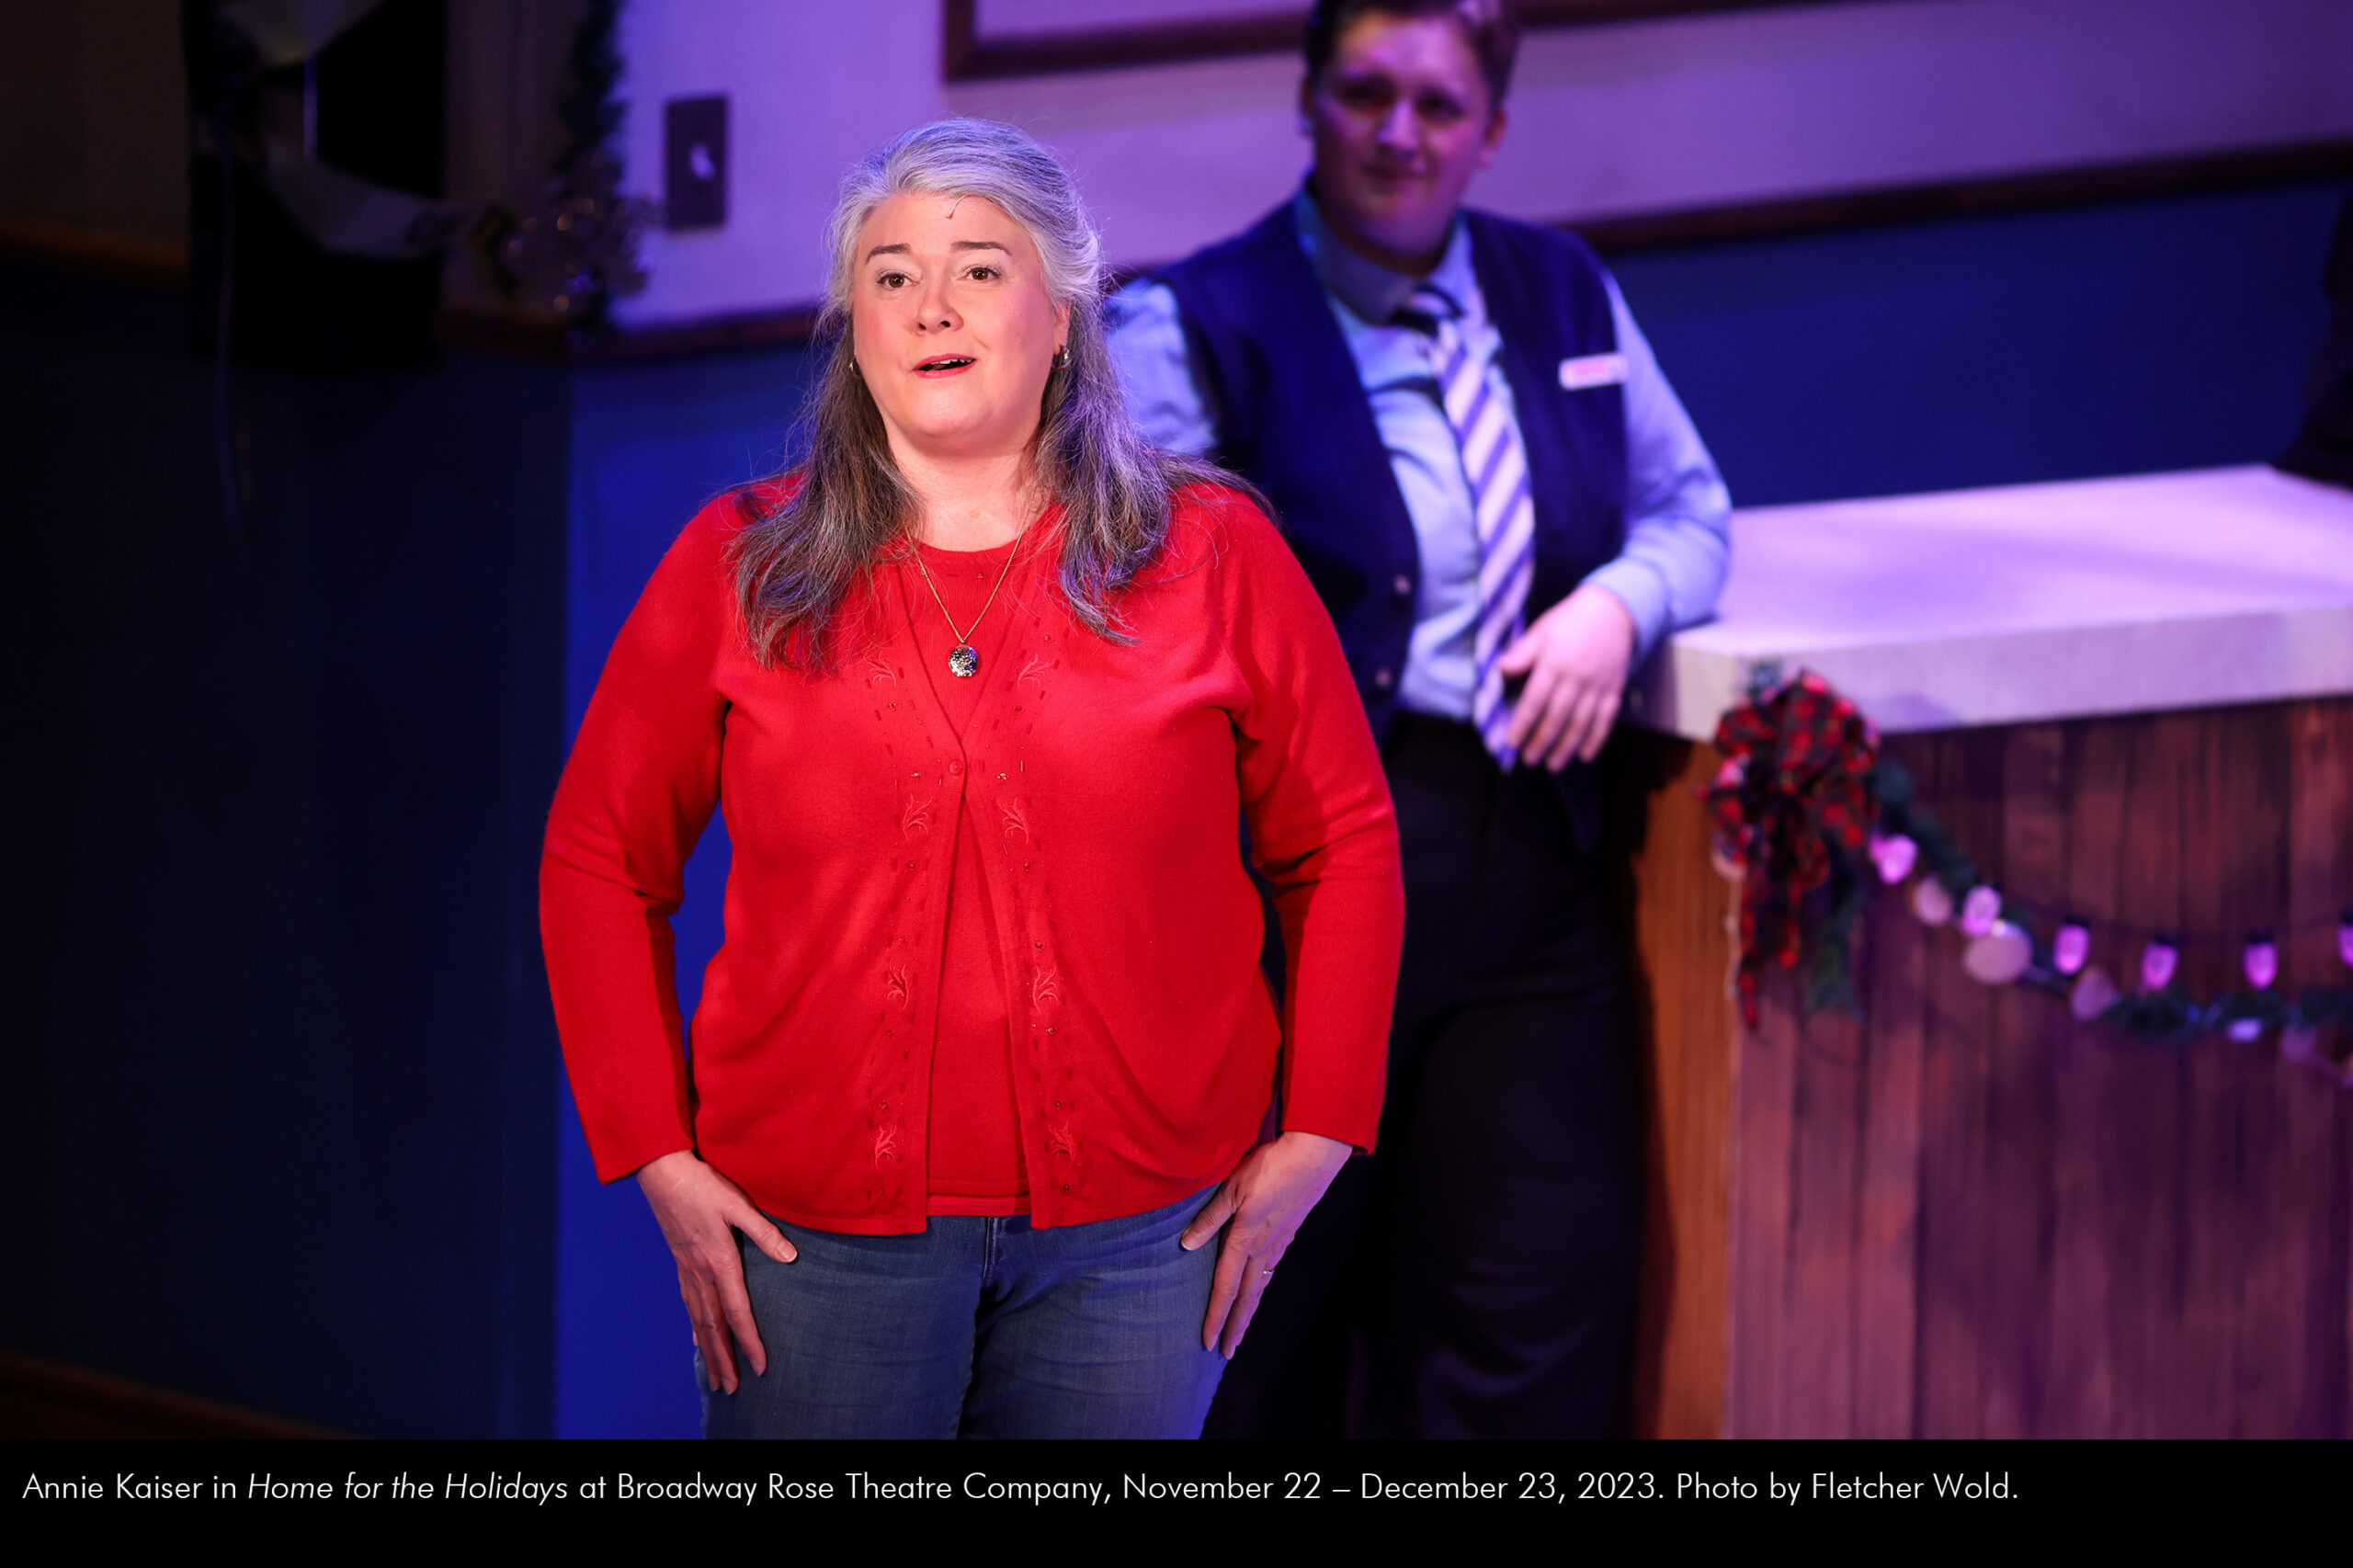 Annie Kaiser in Home for the Holidays at Broadway Rose Theatre Company, November 22 – December 23, 2023. Photo by Fletcher Wold.